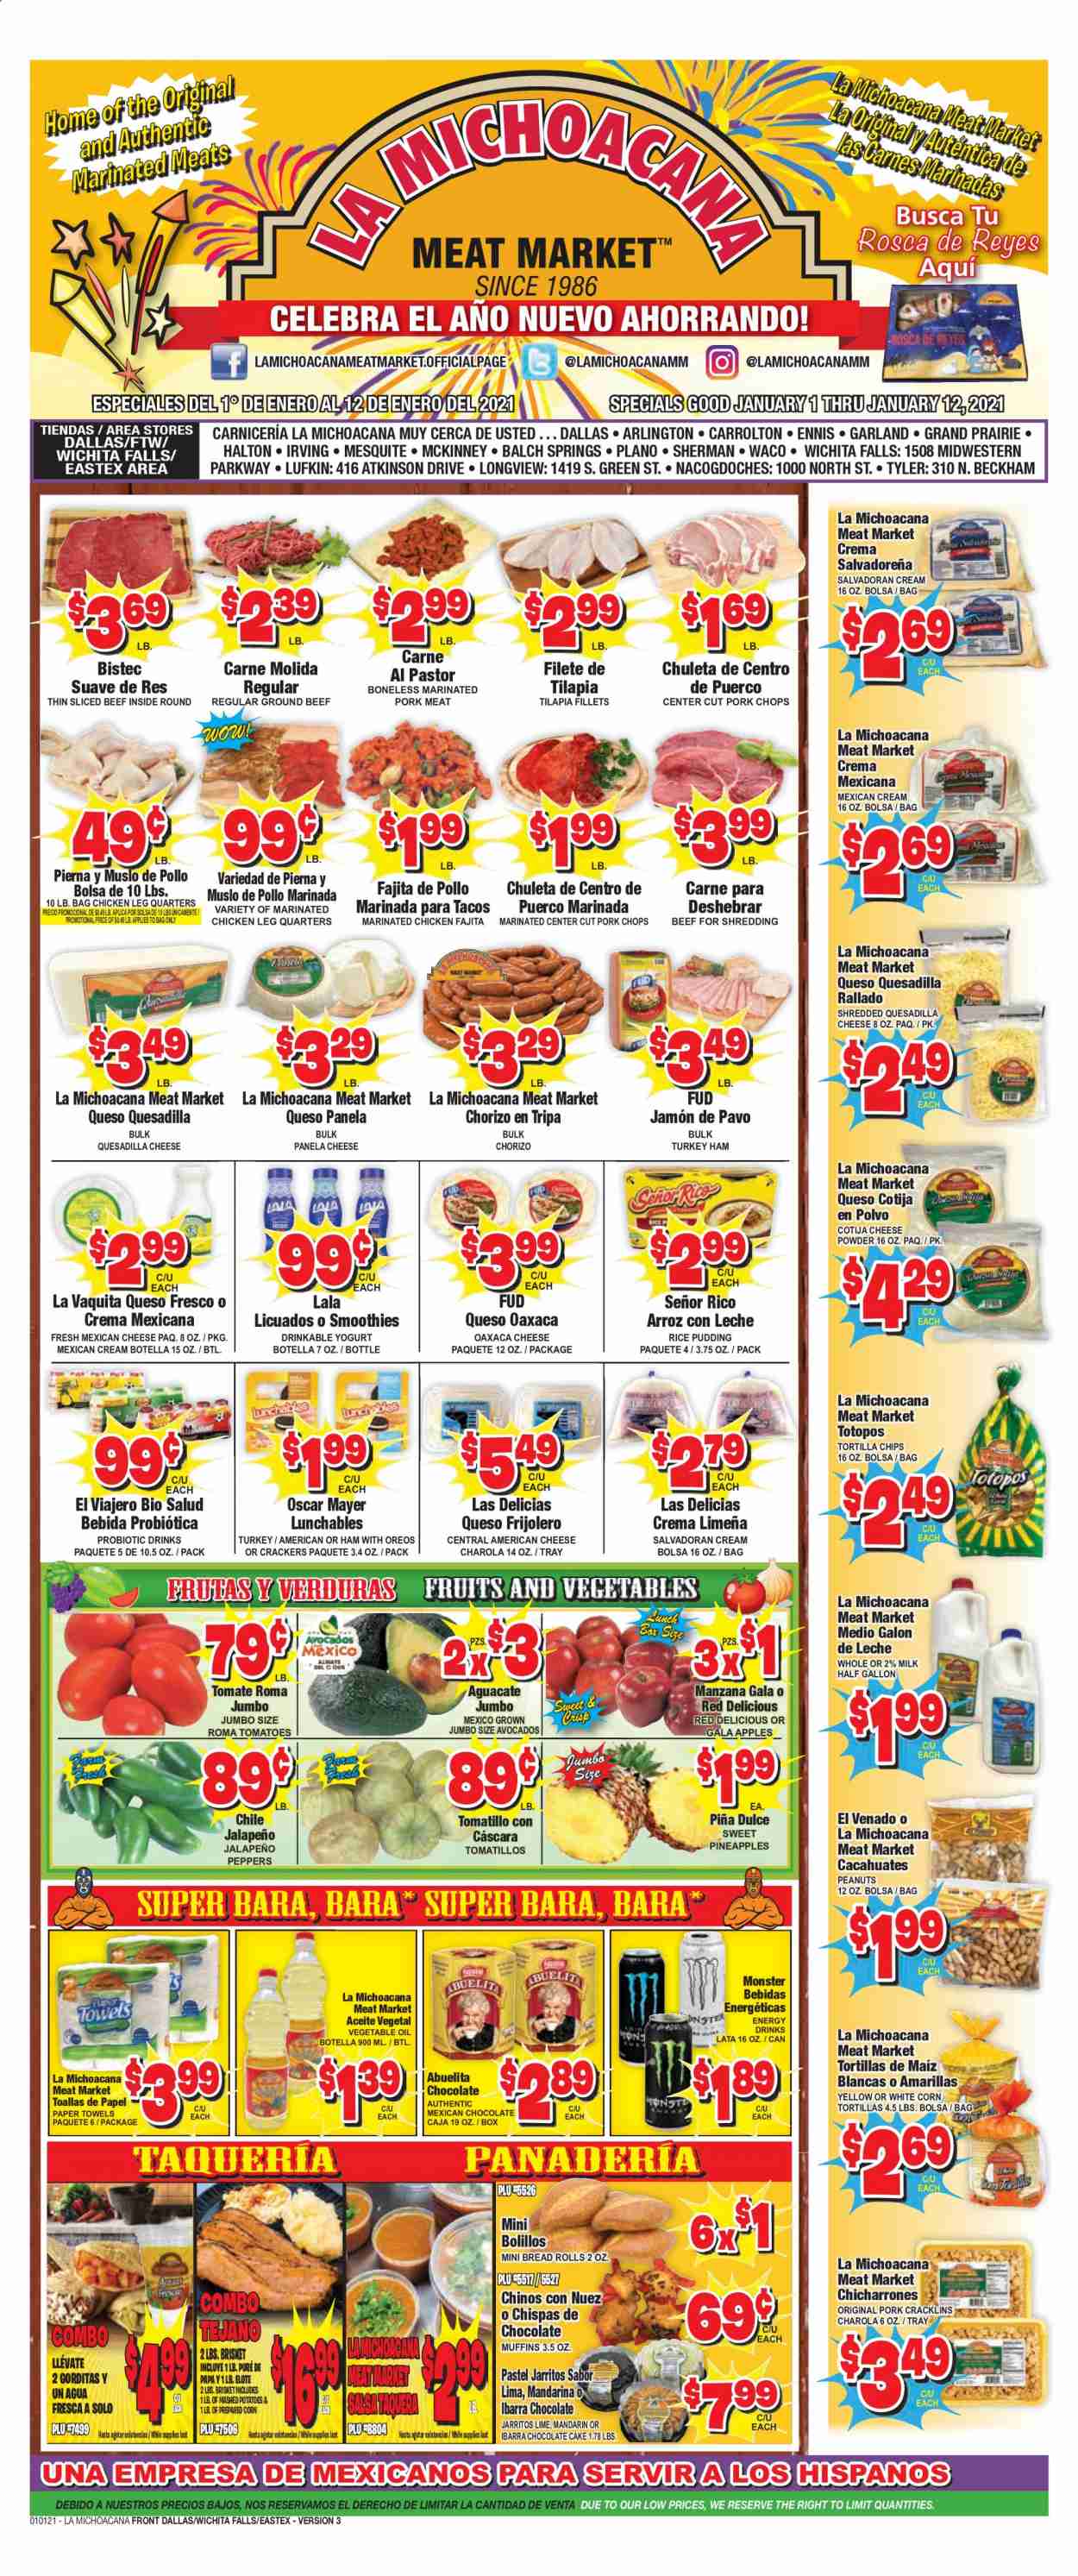 thumbnail - La Michoacana Meat Market Flyer - 01/01/2021 - 01/12/2021 - Sales products - tomatillo, bread, tacos, cake, muffin, apples, tilapia, mashed potatoes, fajita, Lunchables, chorizo, Oscar Mayer, american cheese, queso fresco, cheese, Panela cheese, pudding, yoghurt, milk, salsa, chocolate, crackers, corn tortillas, tortilla chips, chips, mandarines, jalapeño, rice, vegetable oil, peanuts, energy drink, Monster, smoothie, beef meat, ground beef, pork chops, pork meat, marinated pork, kitchen towels, paper towels, Suave, tray, avocado, Gala, Red Delicious apples, pineapple. Page 1.